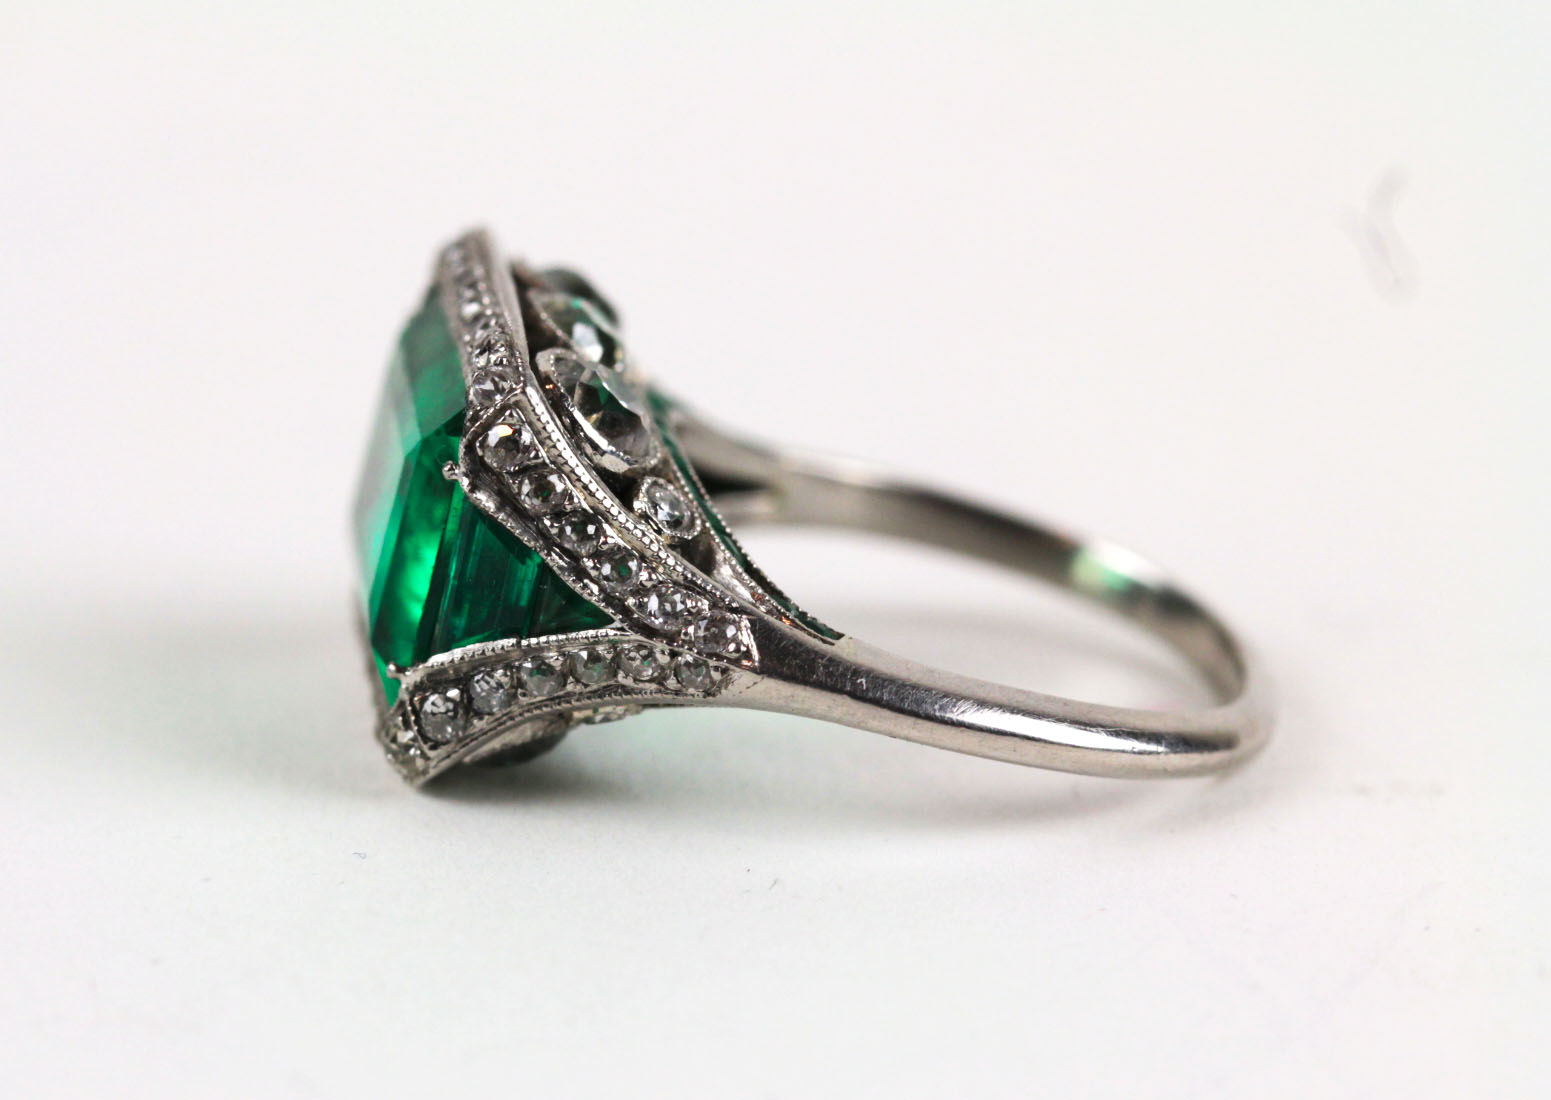 Emerald Ring – Art and Antiques Restoration and Conservation